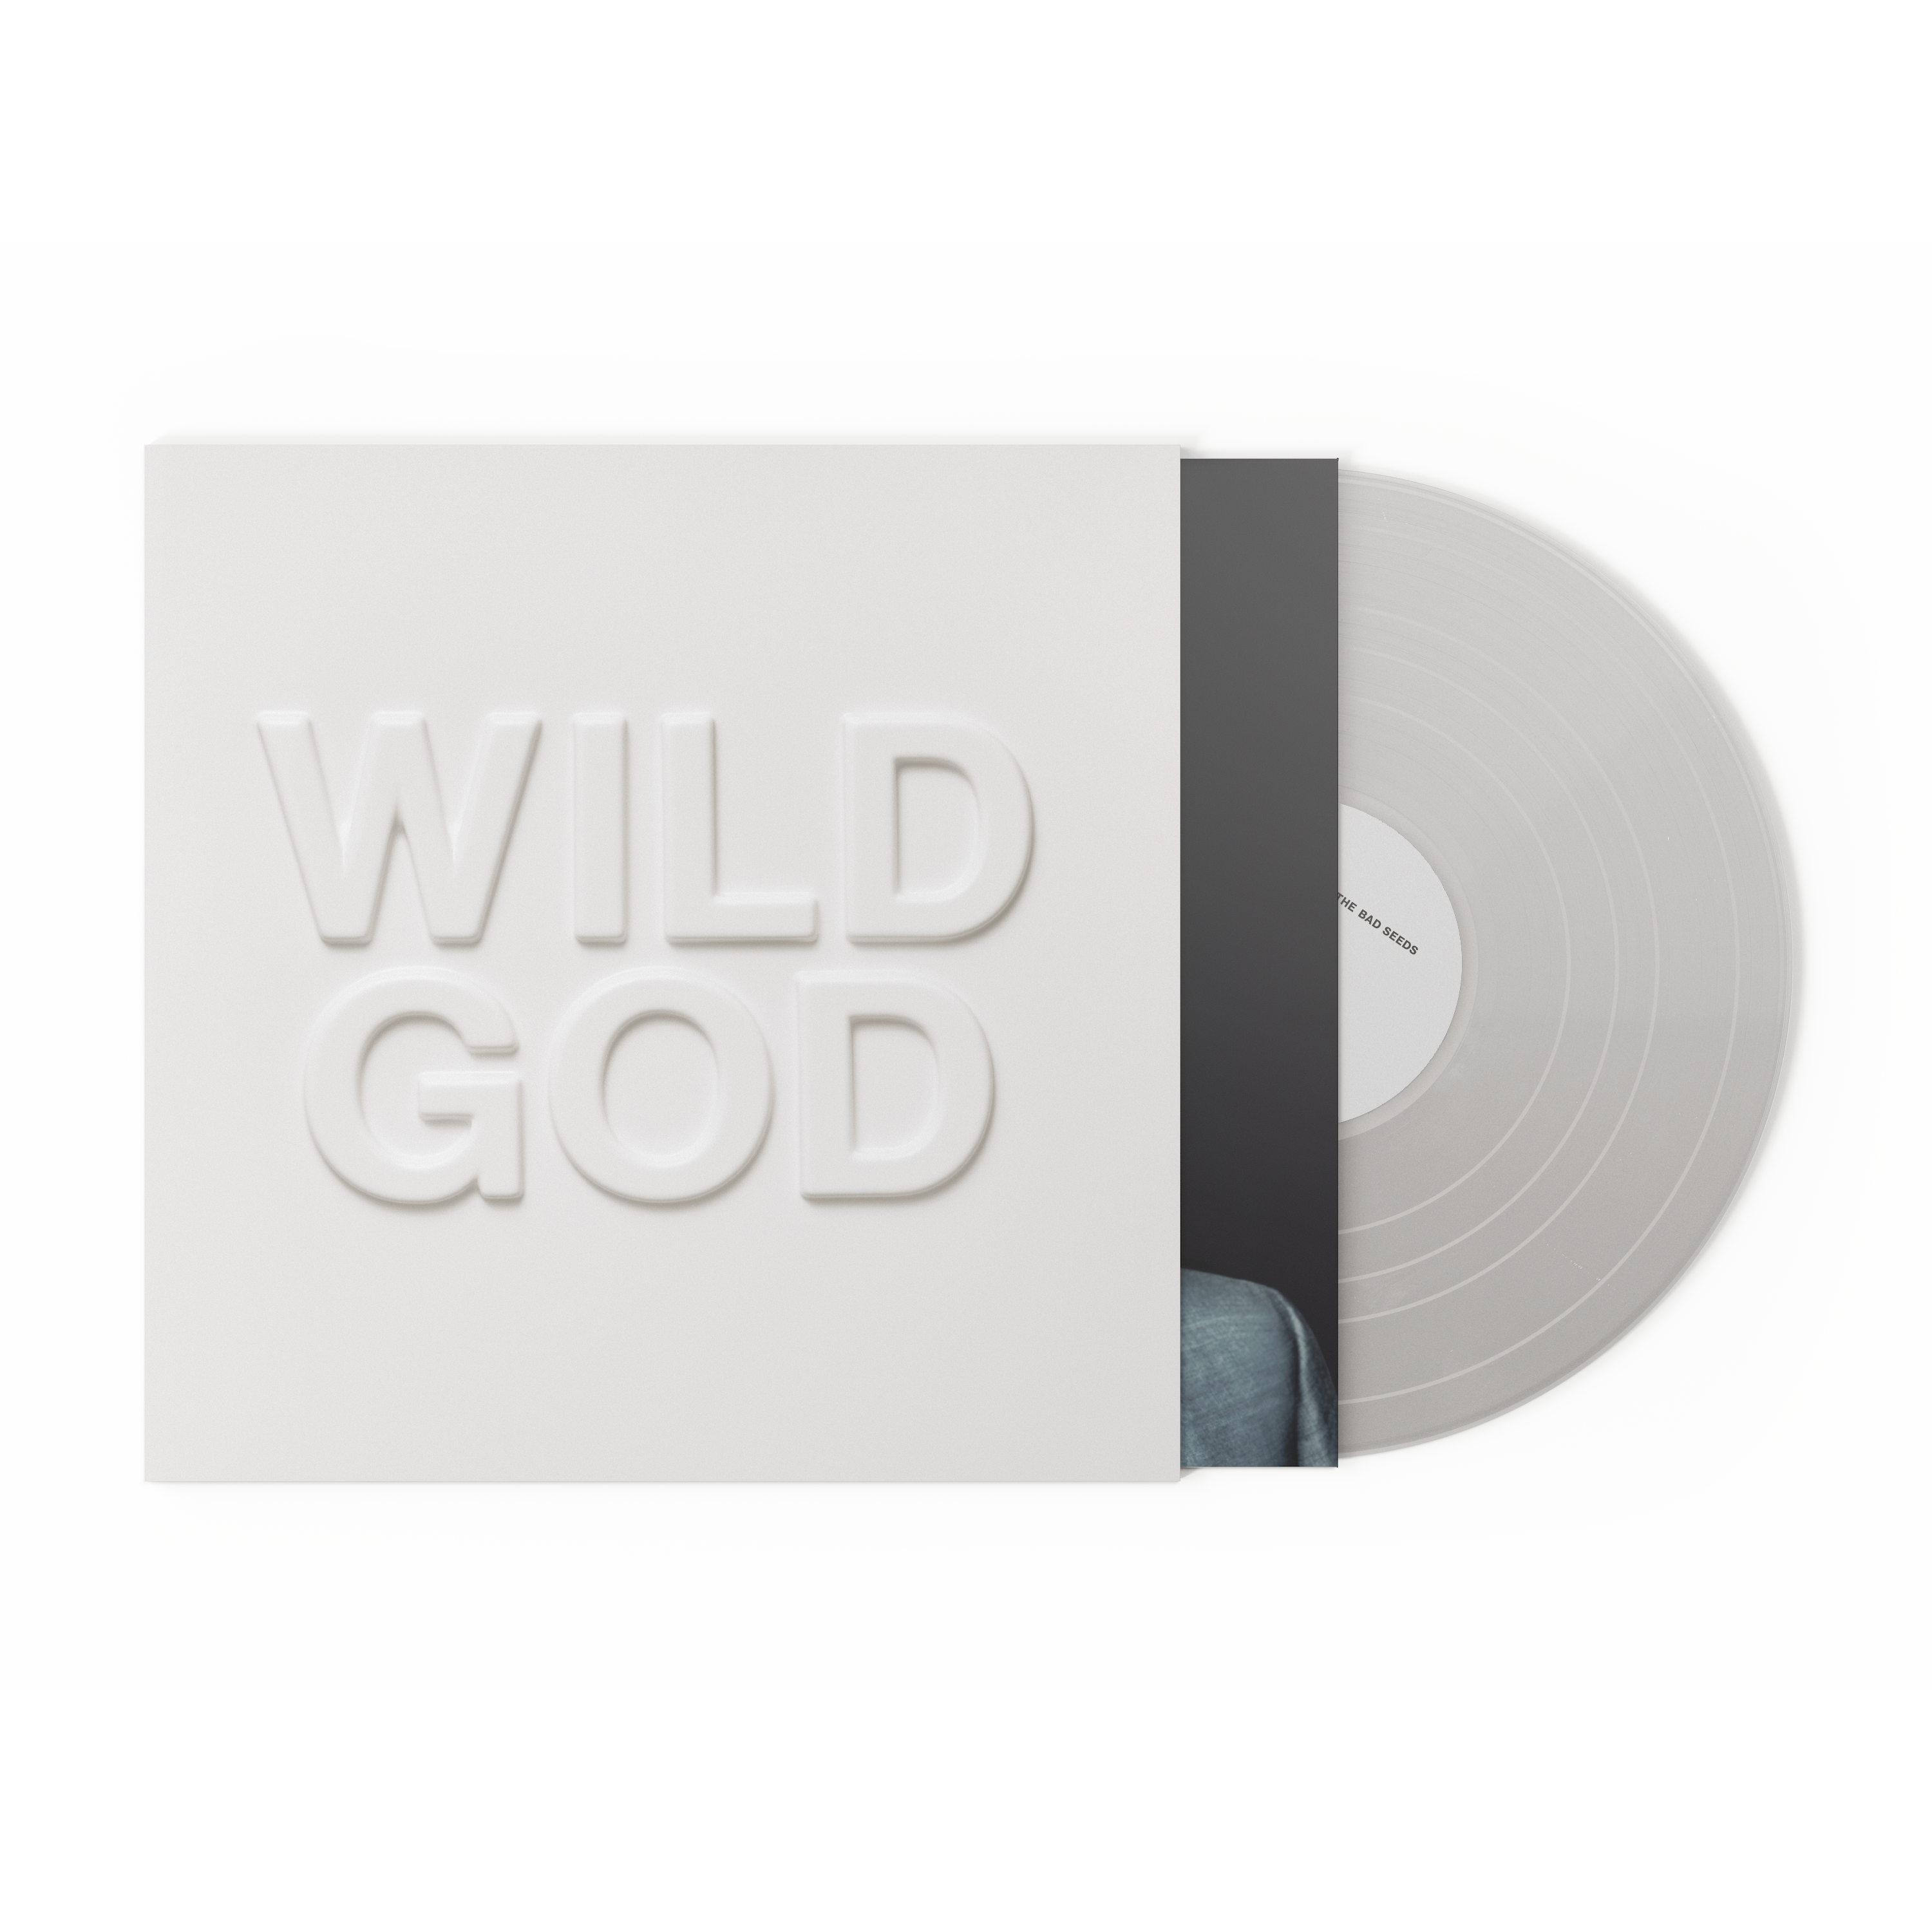 Nick Cave & The Bad Seeds - Wild God: Limited Clear Vinyl LP